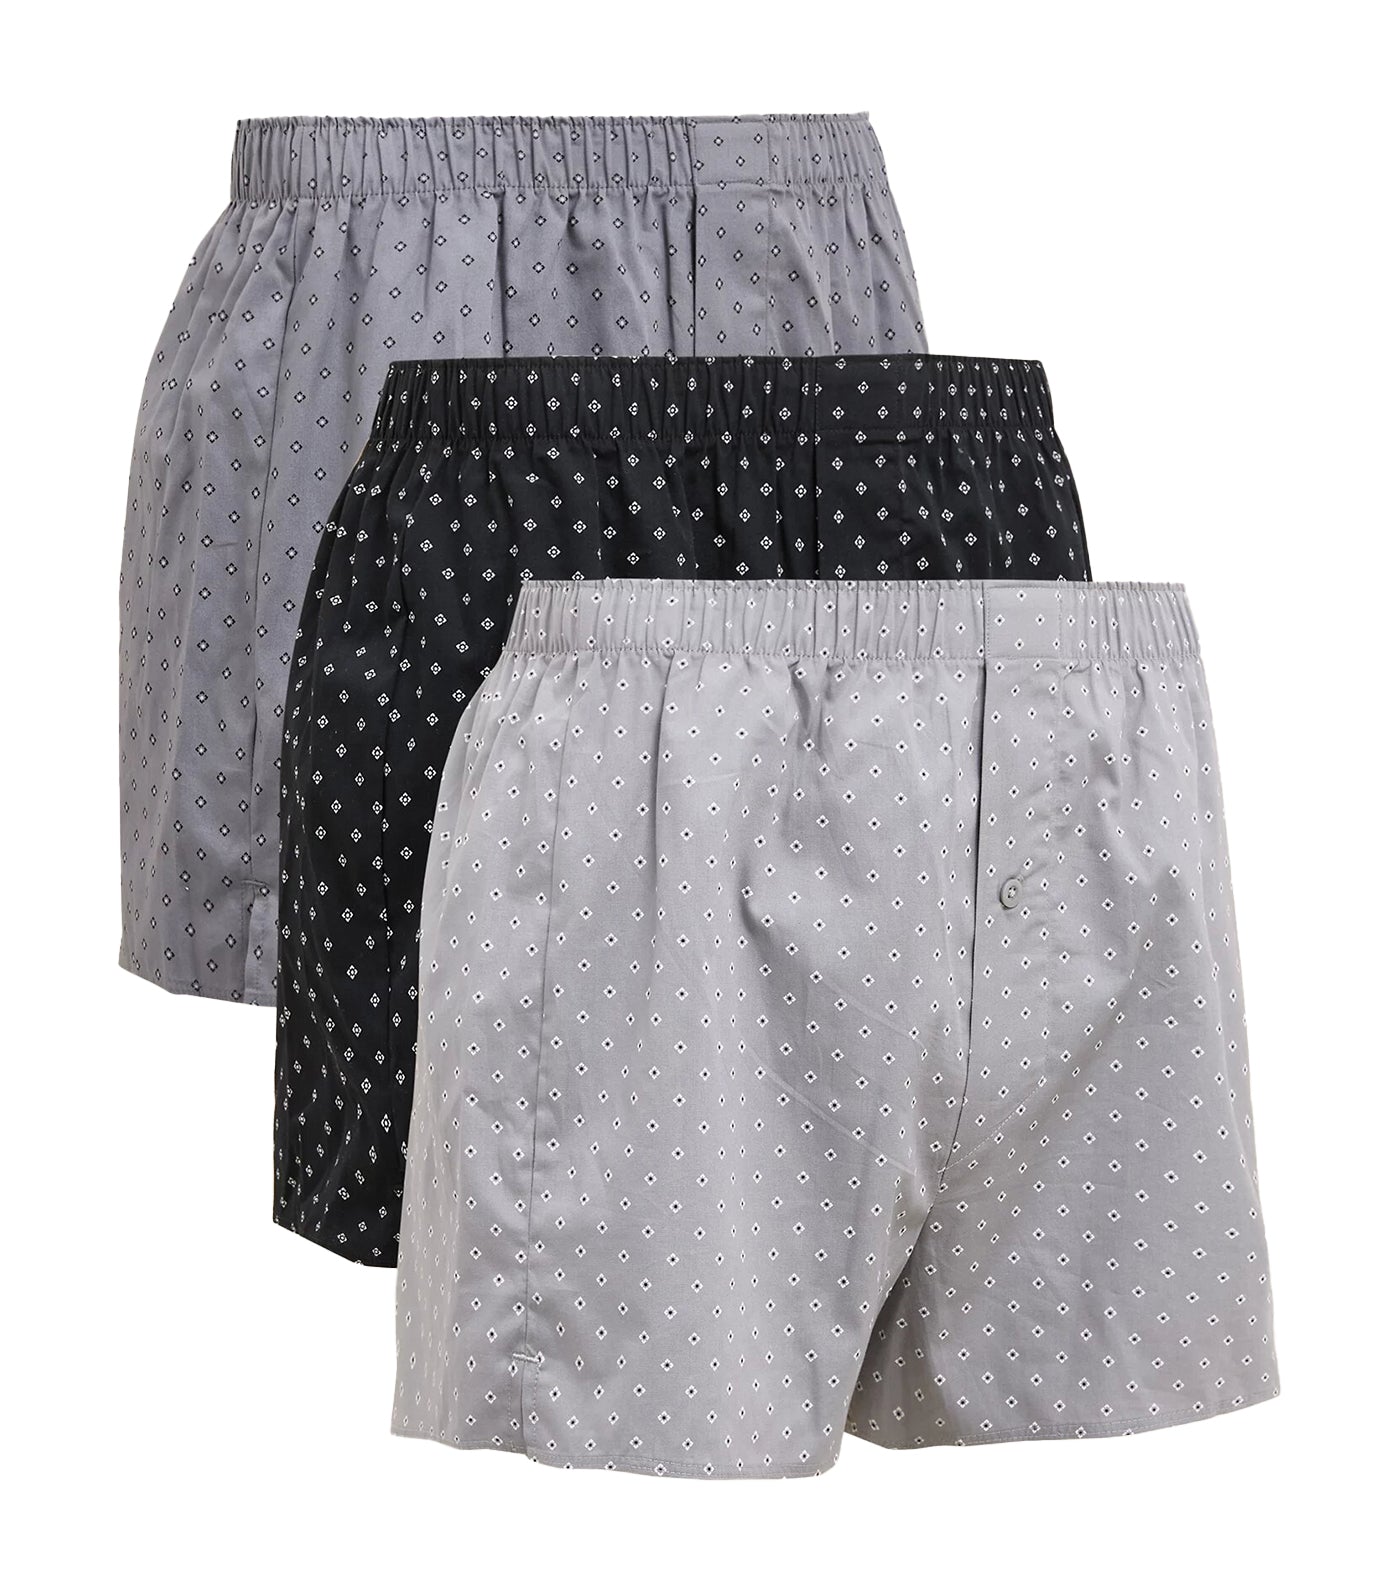 Marks & Spencer 3pk Pure Cotton Geometric Woven Boxers Gray Mix